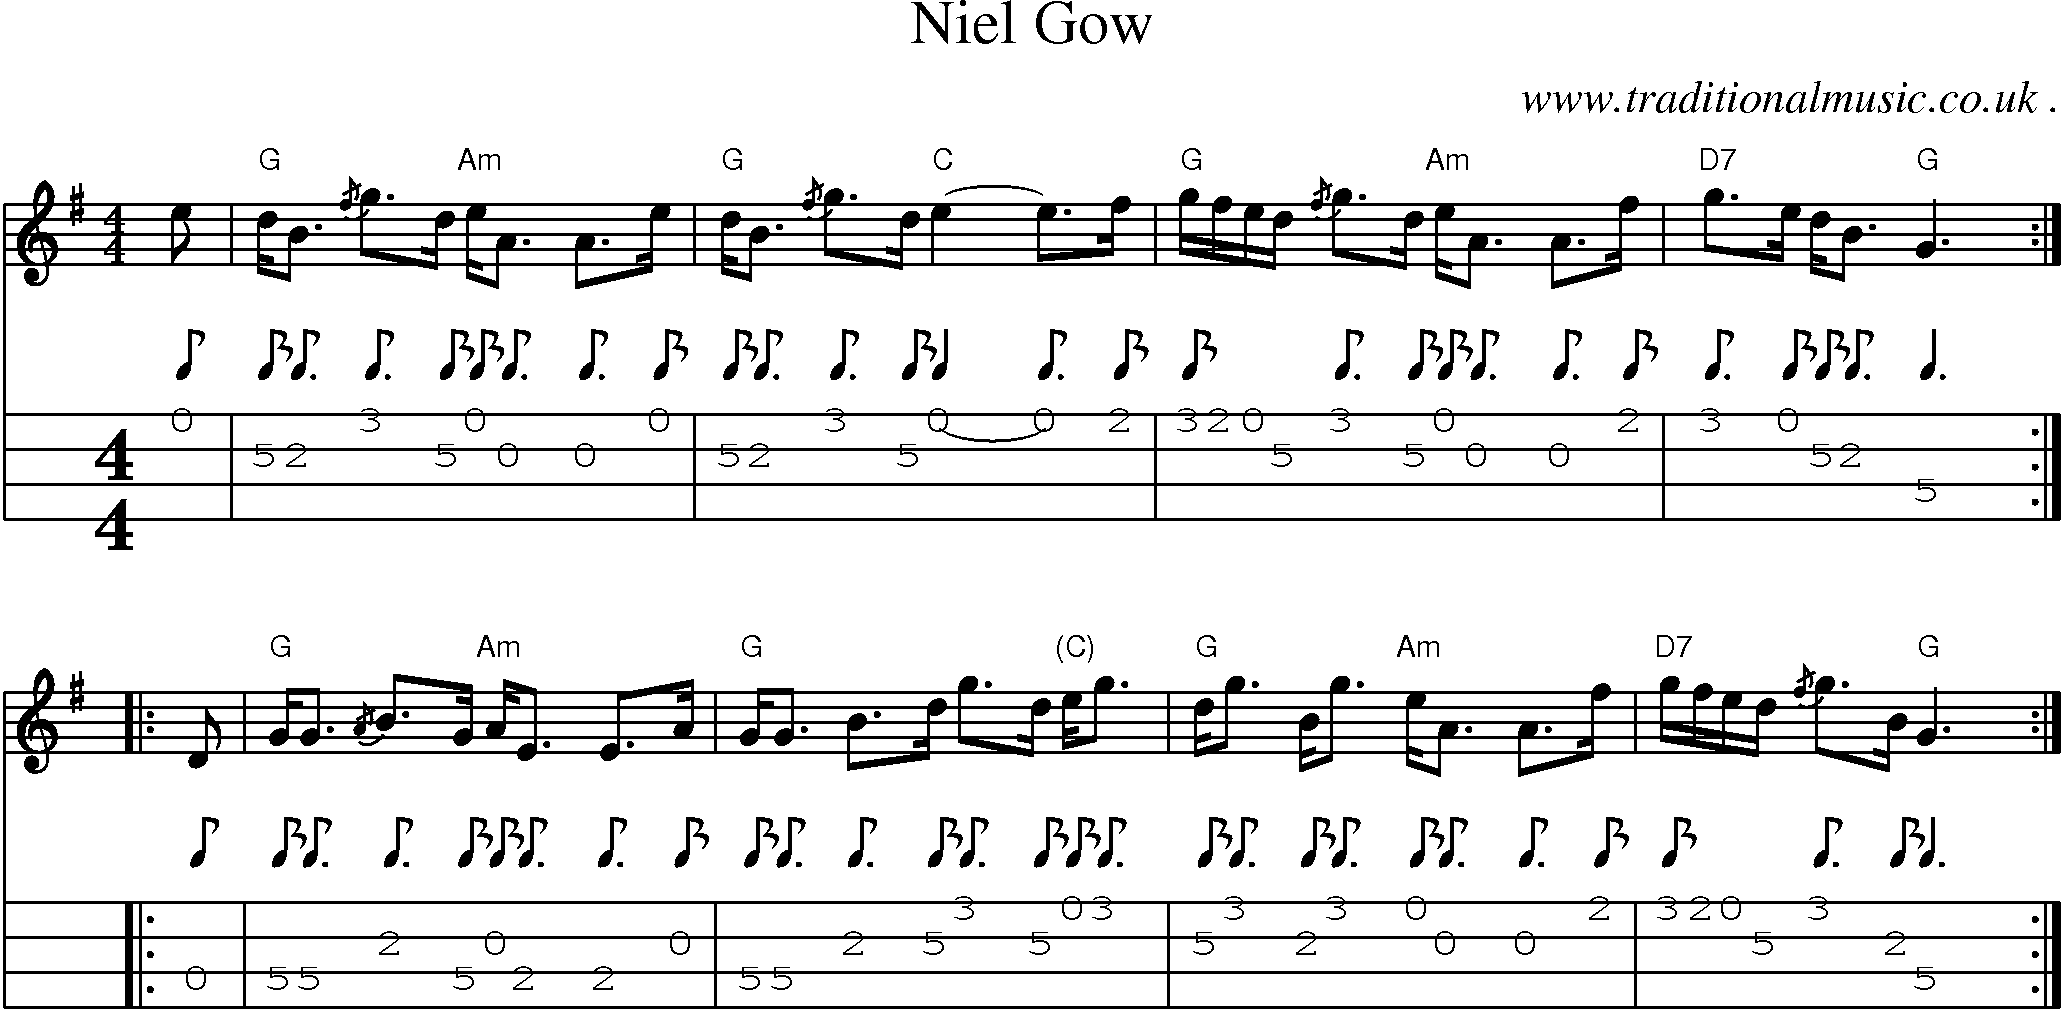 Sheet-music  score, Chords and Mandolin Tabs for Niel Gow